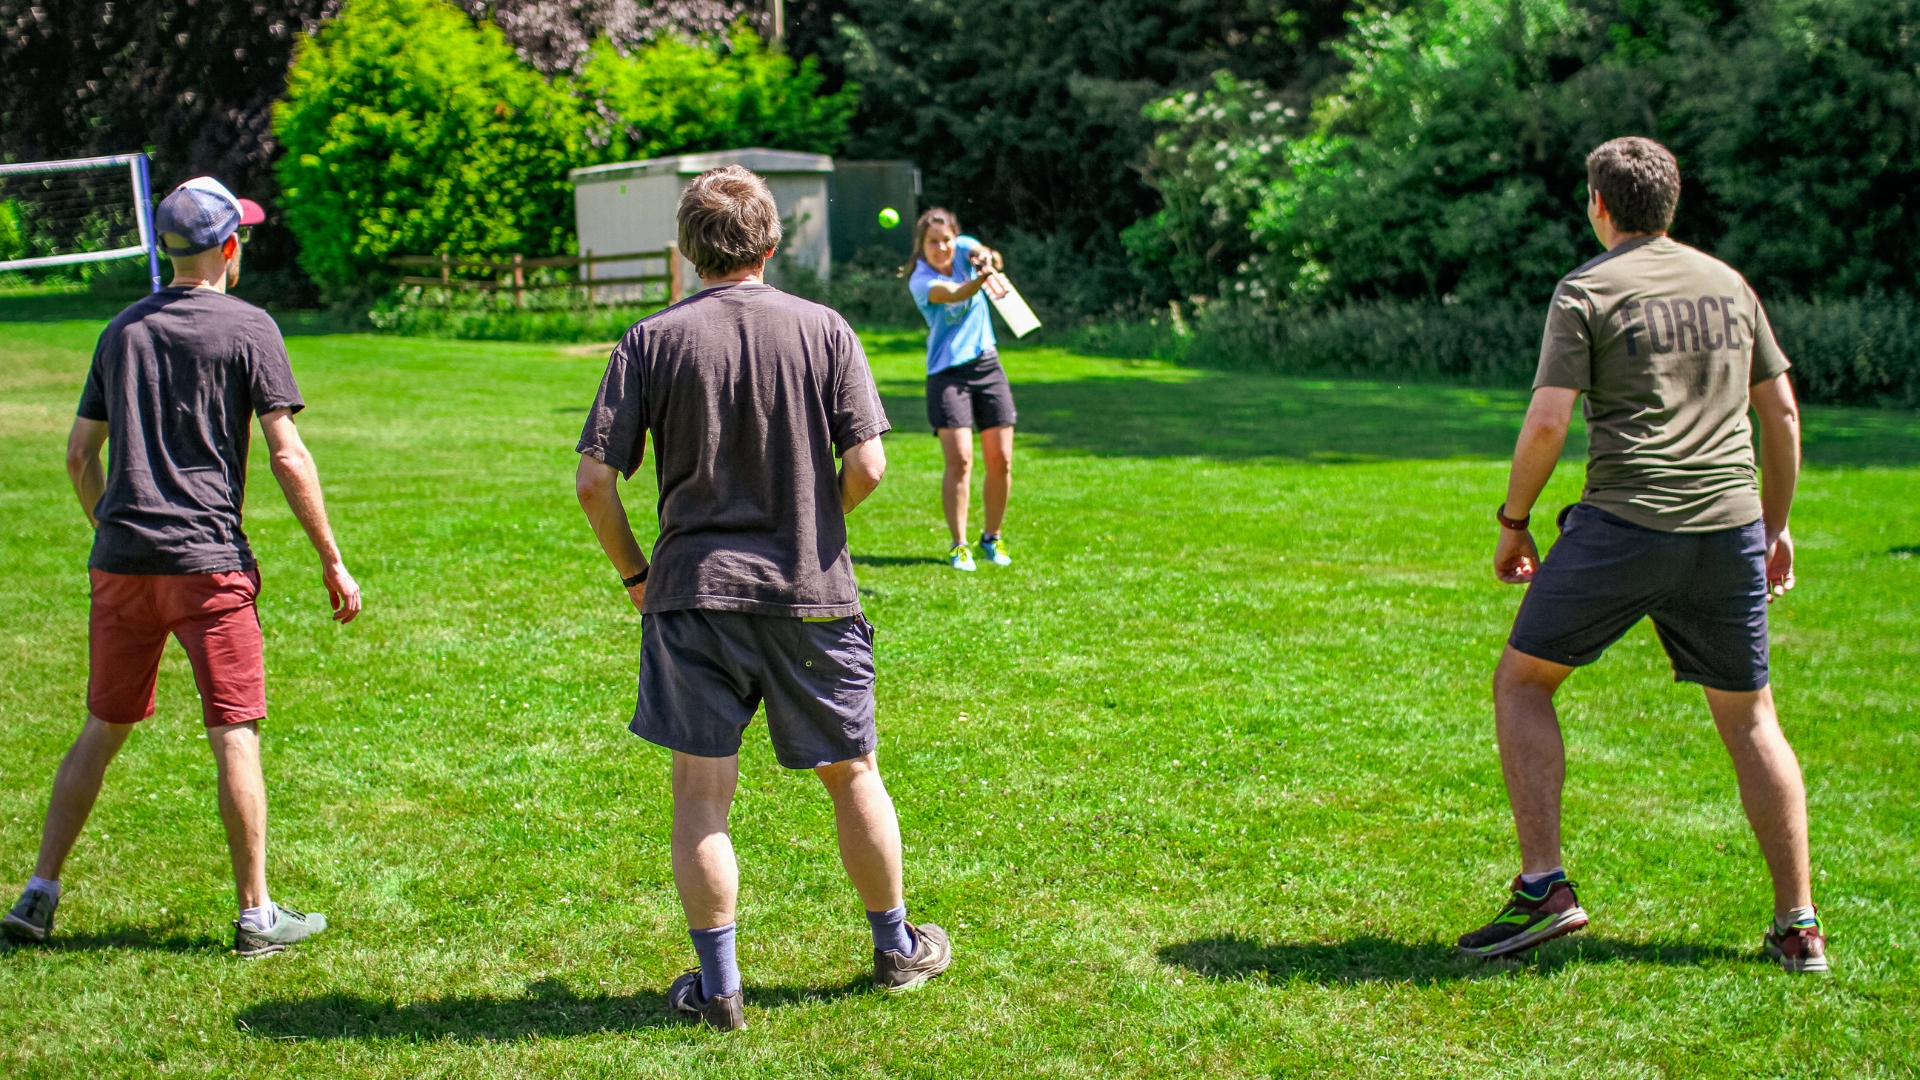 Groups of people playing French cricket in a green field surrounded by green trees